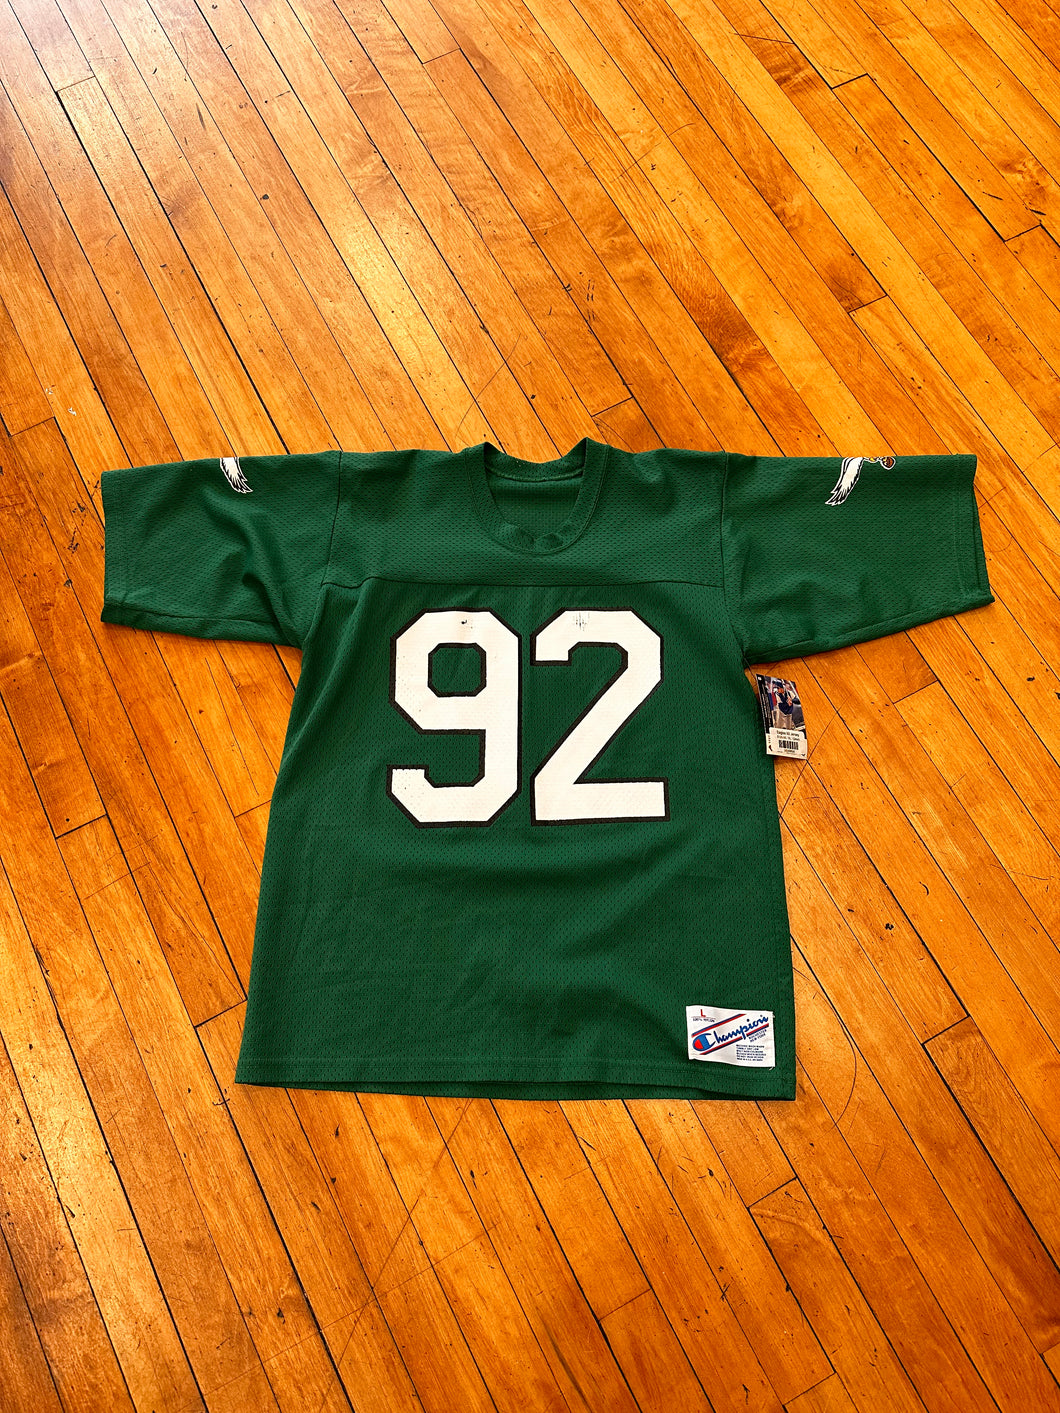 Eagles 92 Jersey